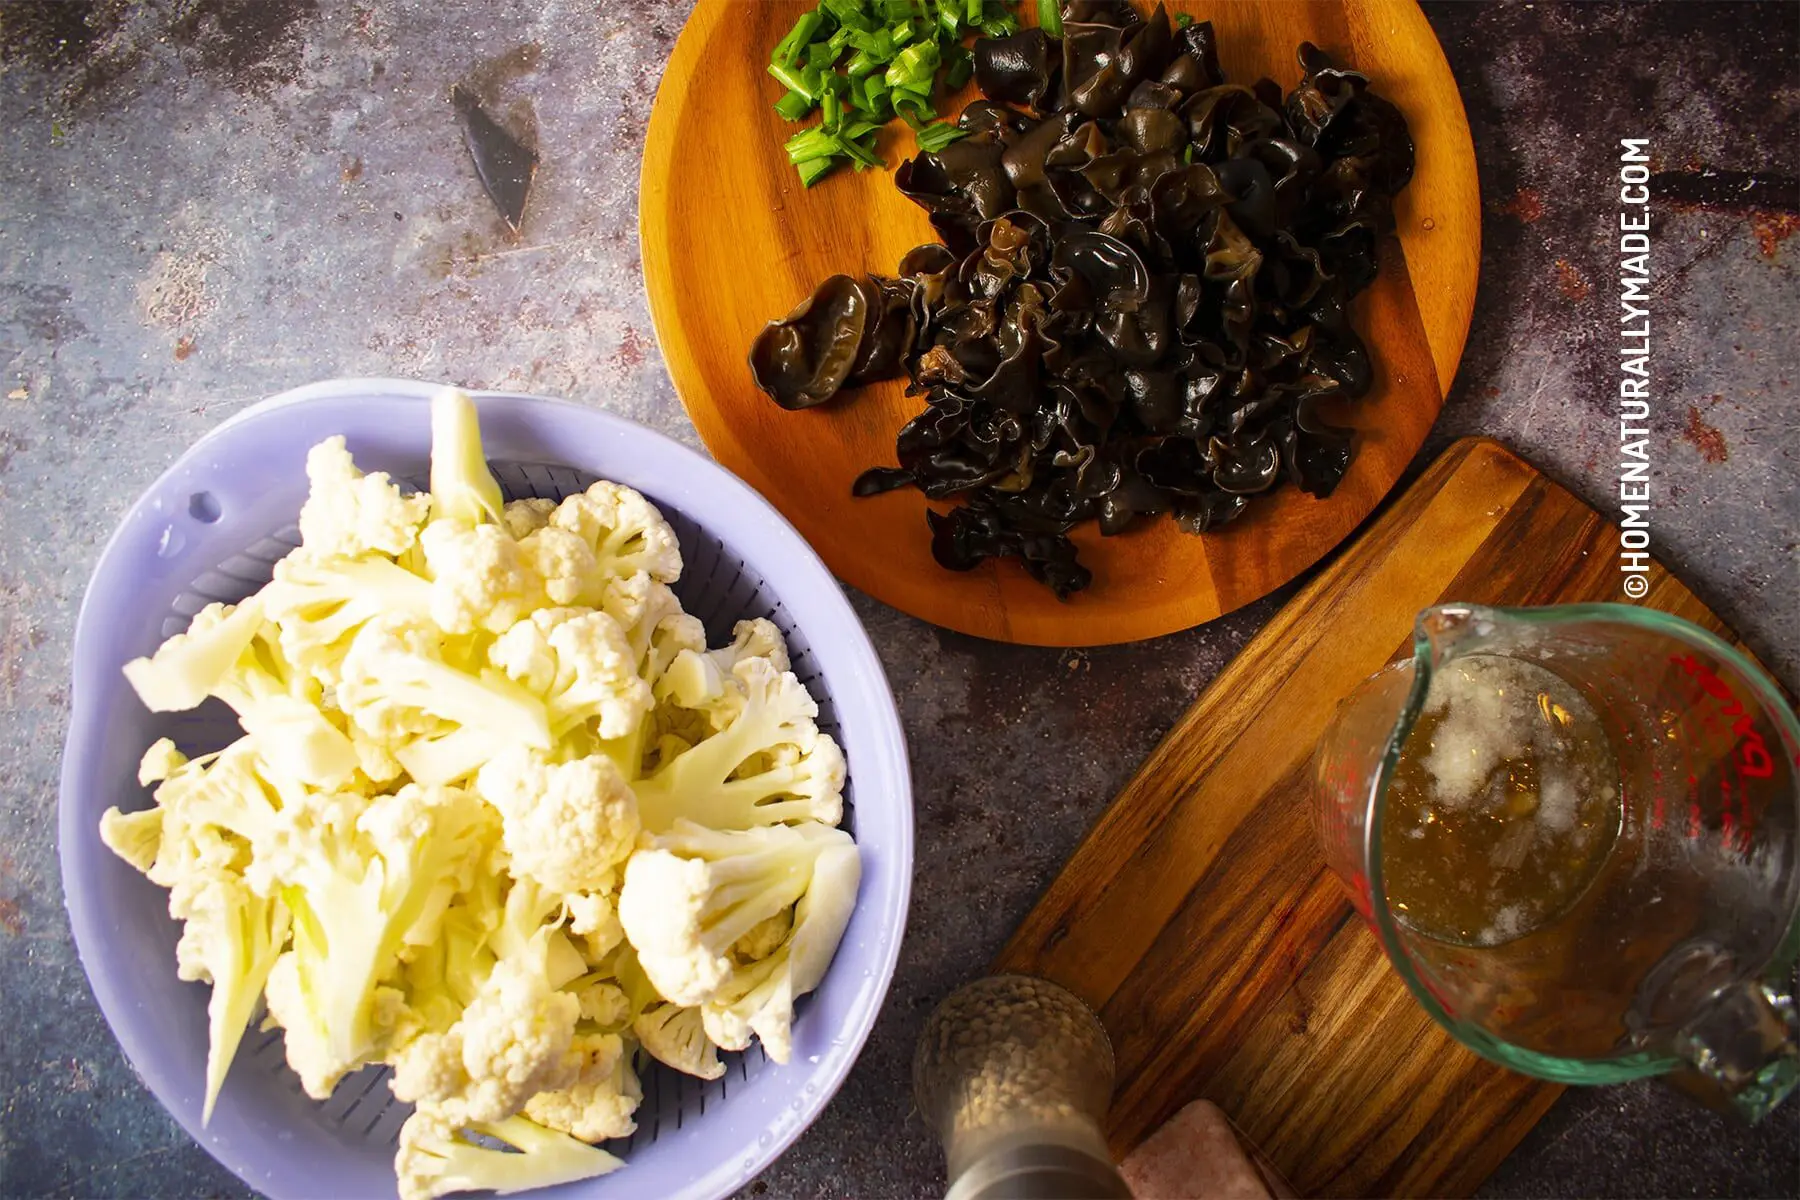 Prepped Cauliflower and Black Fungus for Boiled Cauliflower with Black Fungus Dish